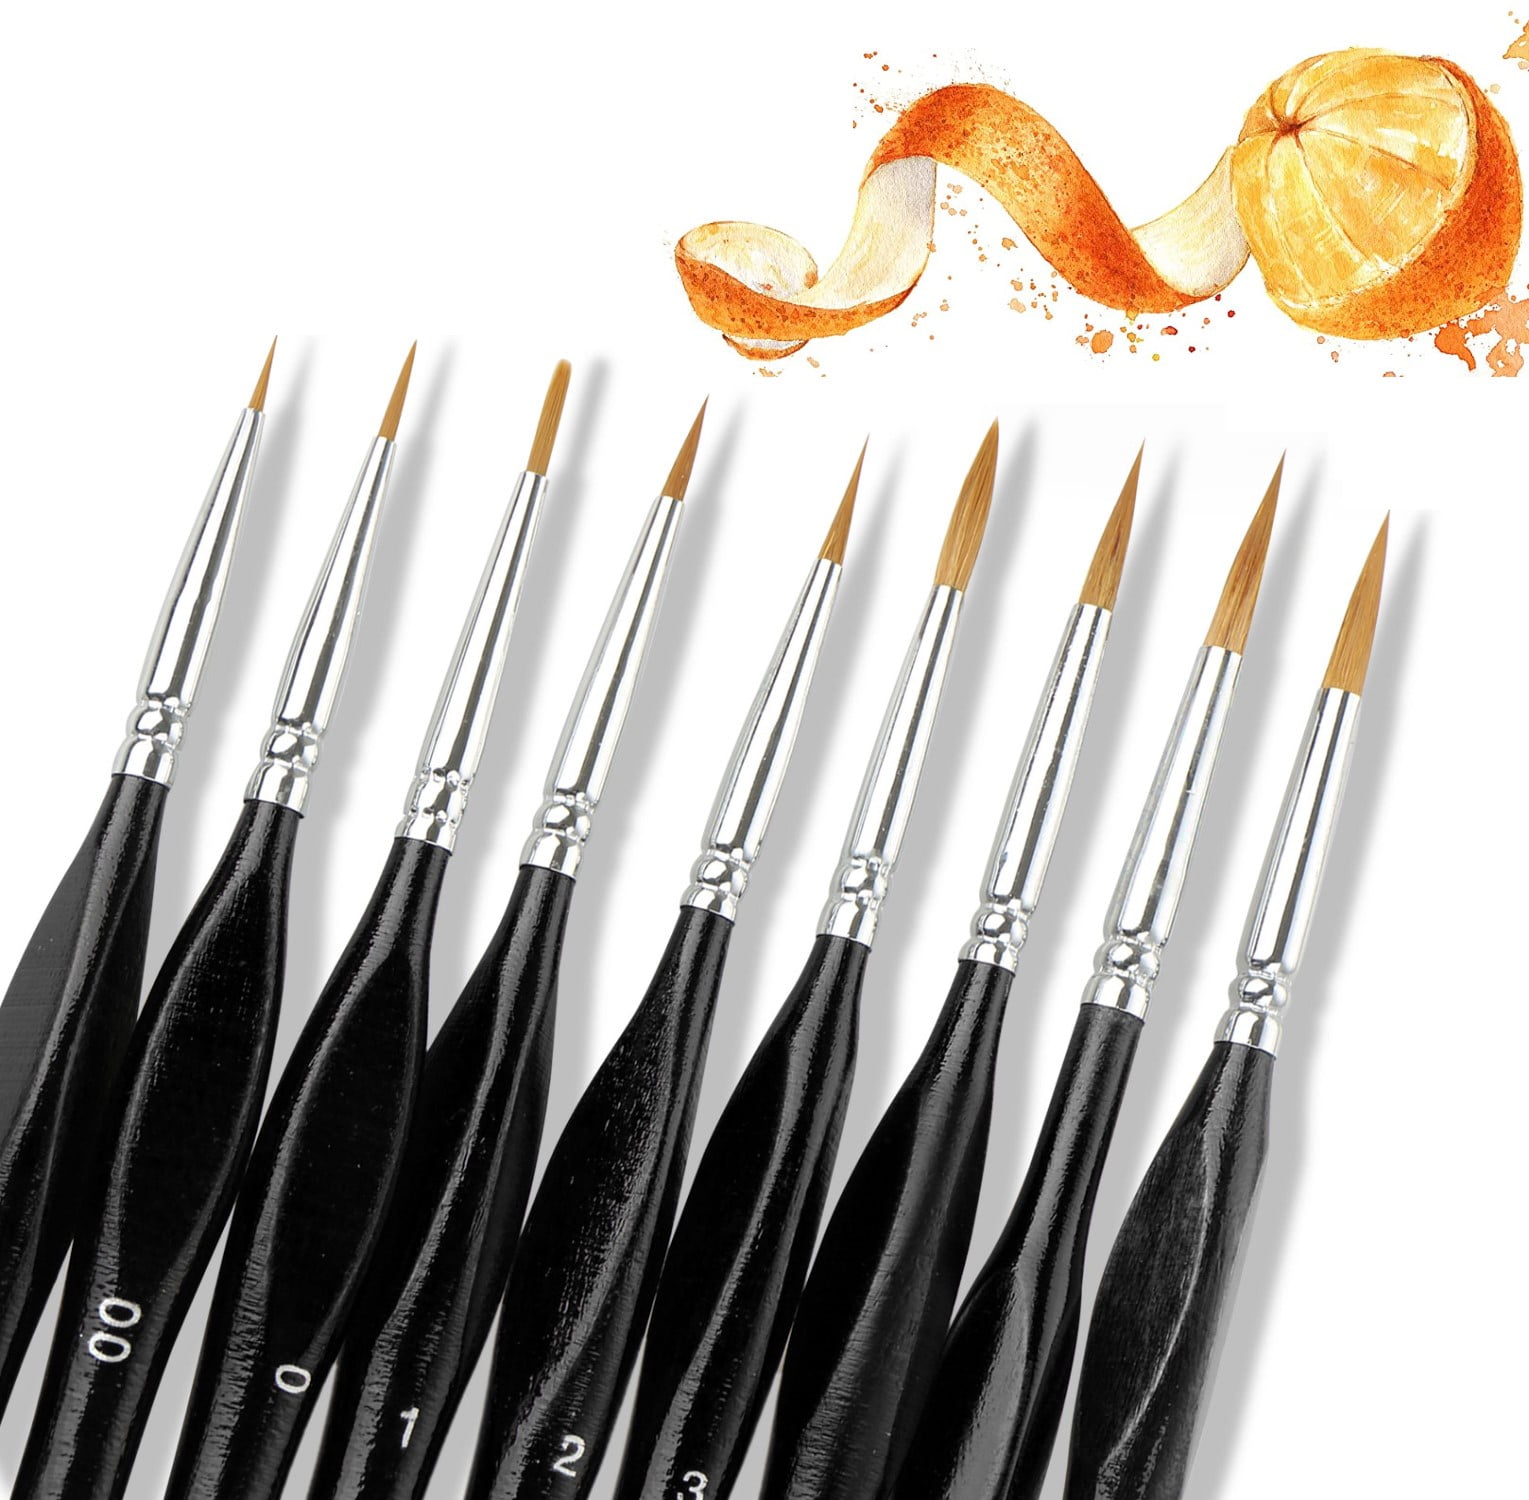 0,1,2,4,6,8,10,12,14 Pack of 10 Red Synthetic Sable Brushes Size 000,00 